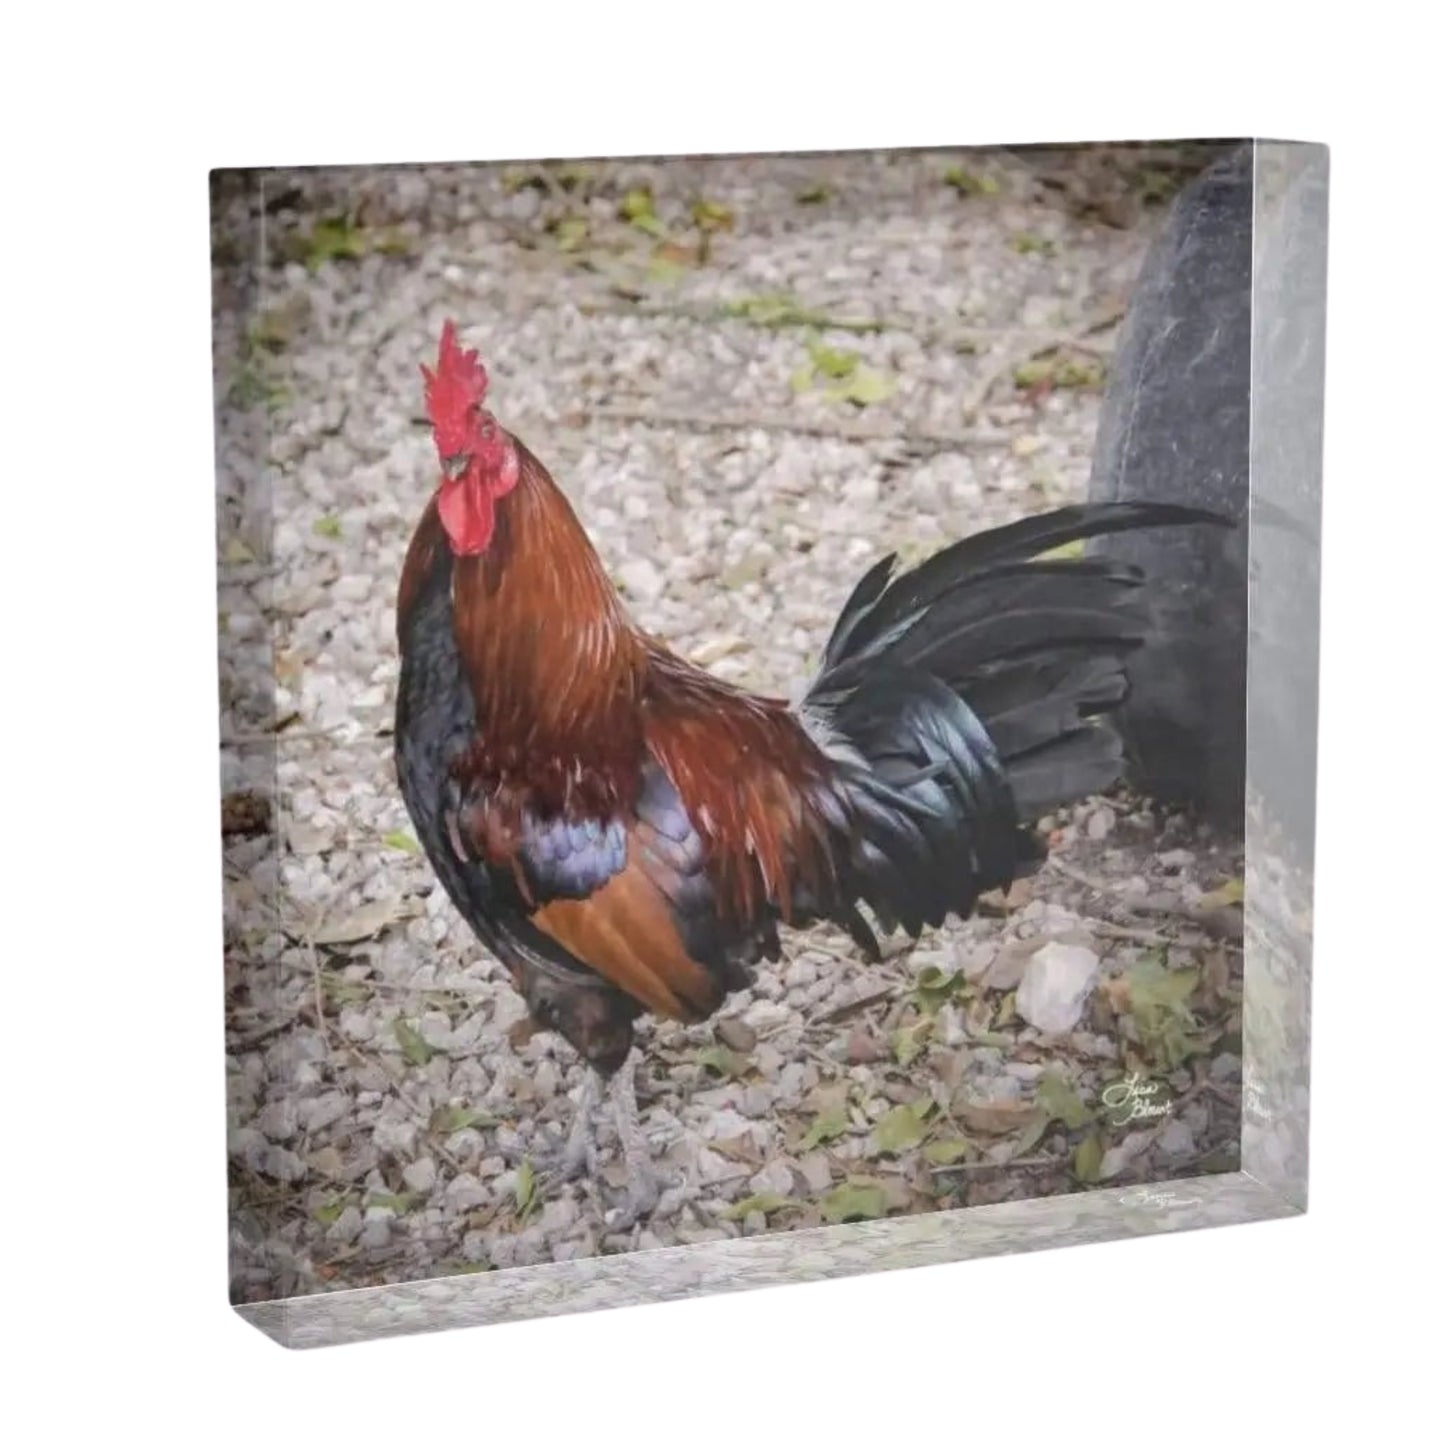 acrylic block of a colorful bantam banty rooster in key west 